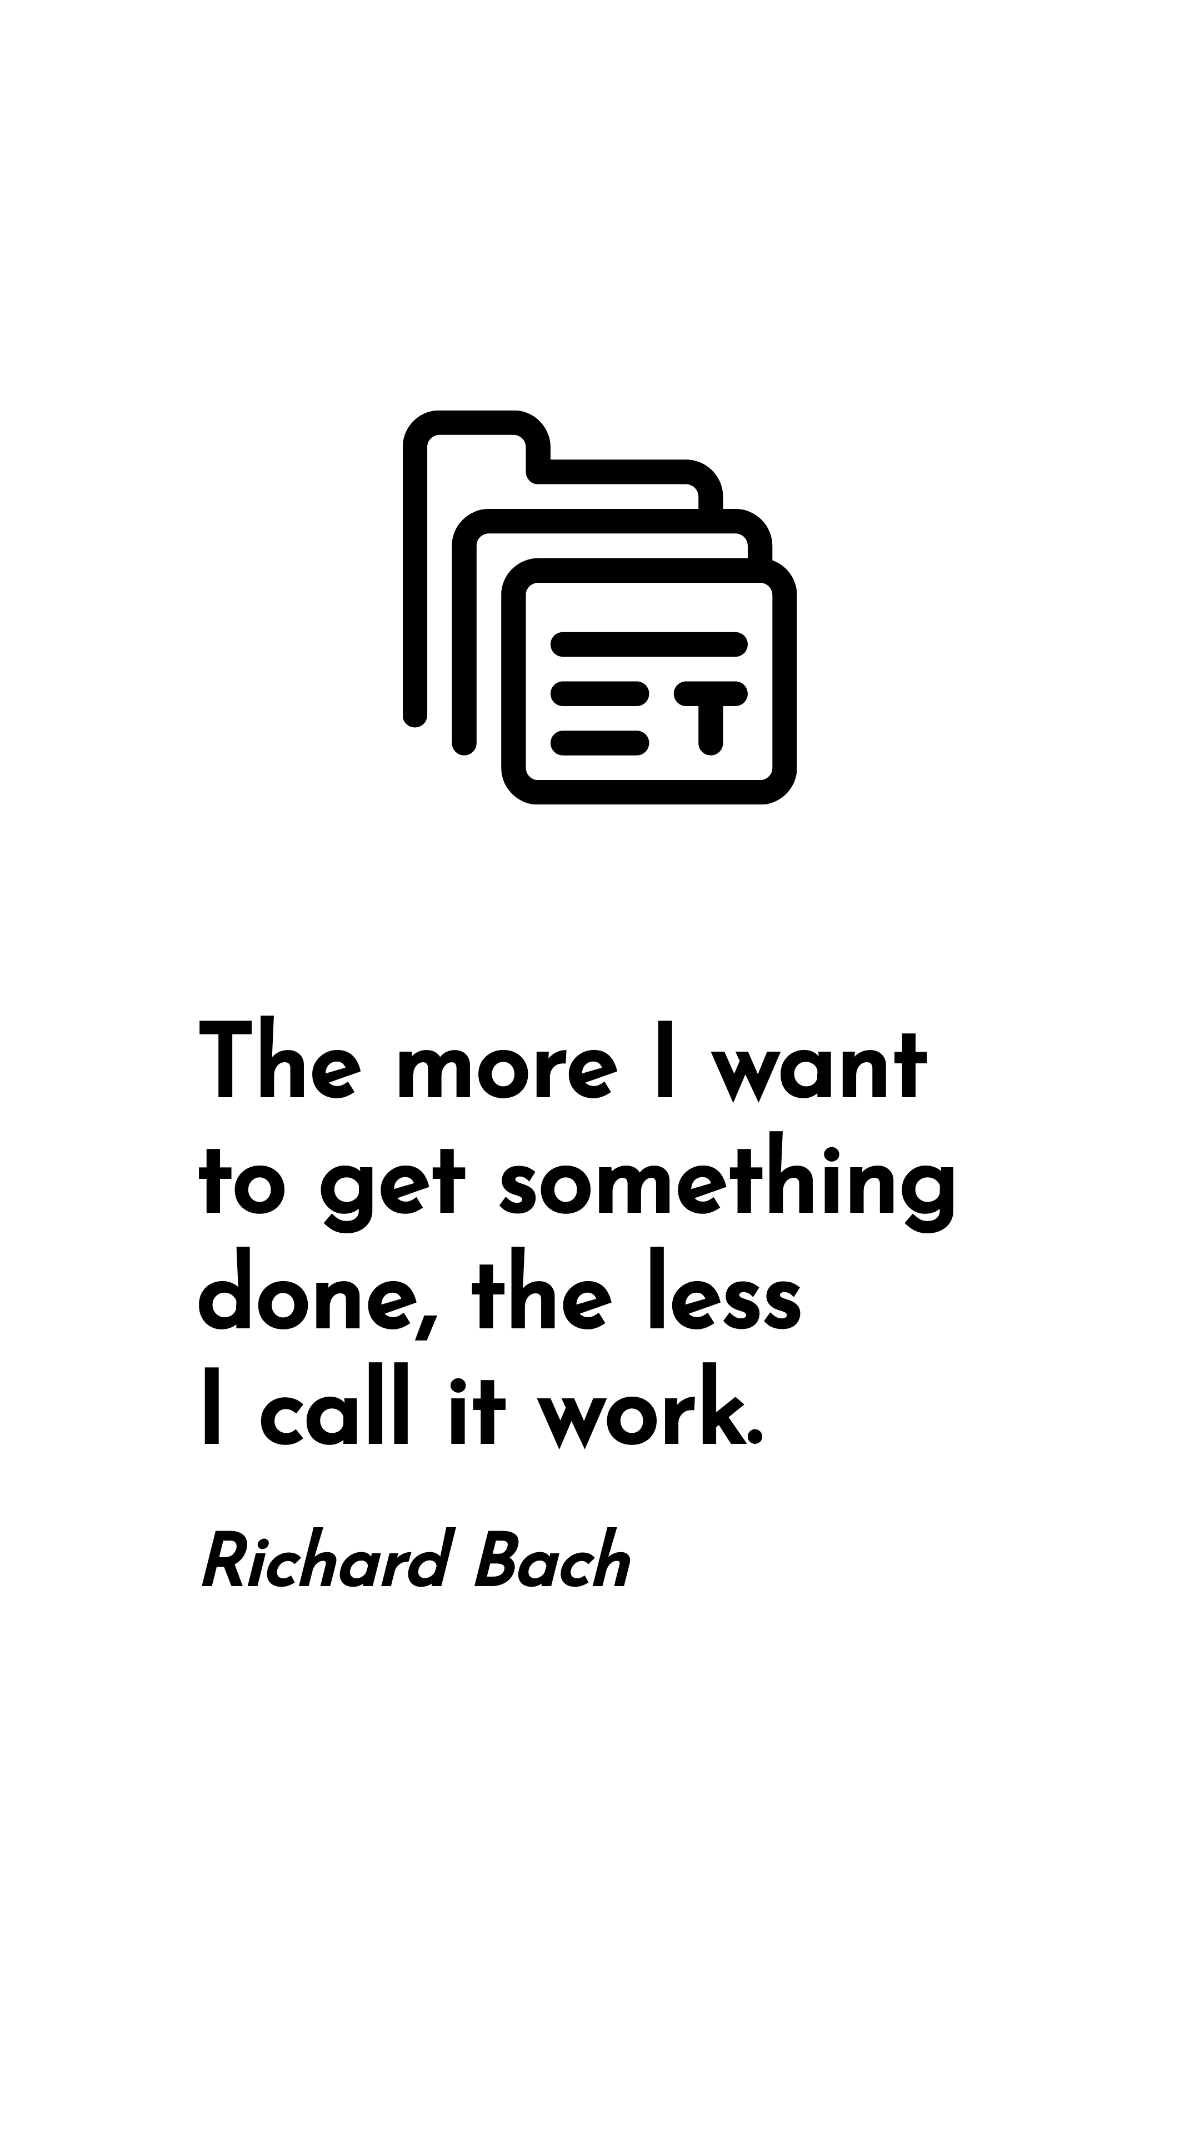 Richard Bach - The more I want to get something done, the less I call it work.